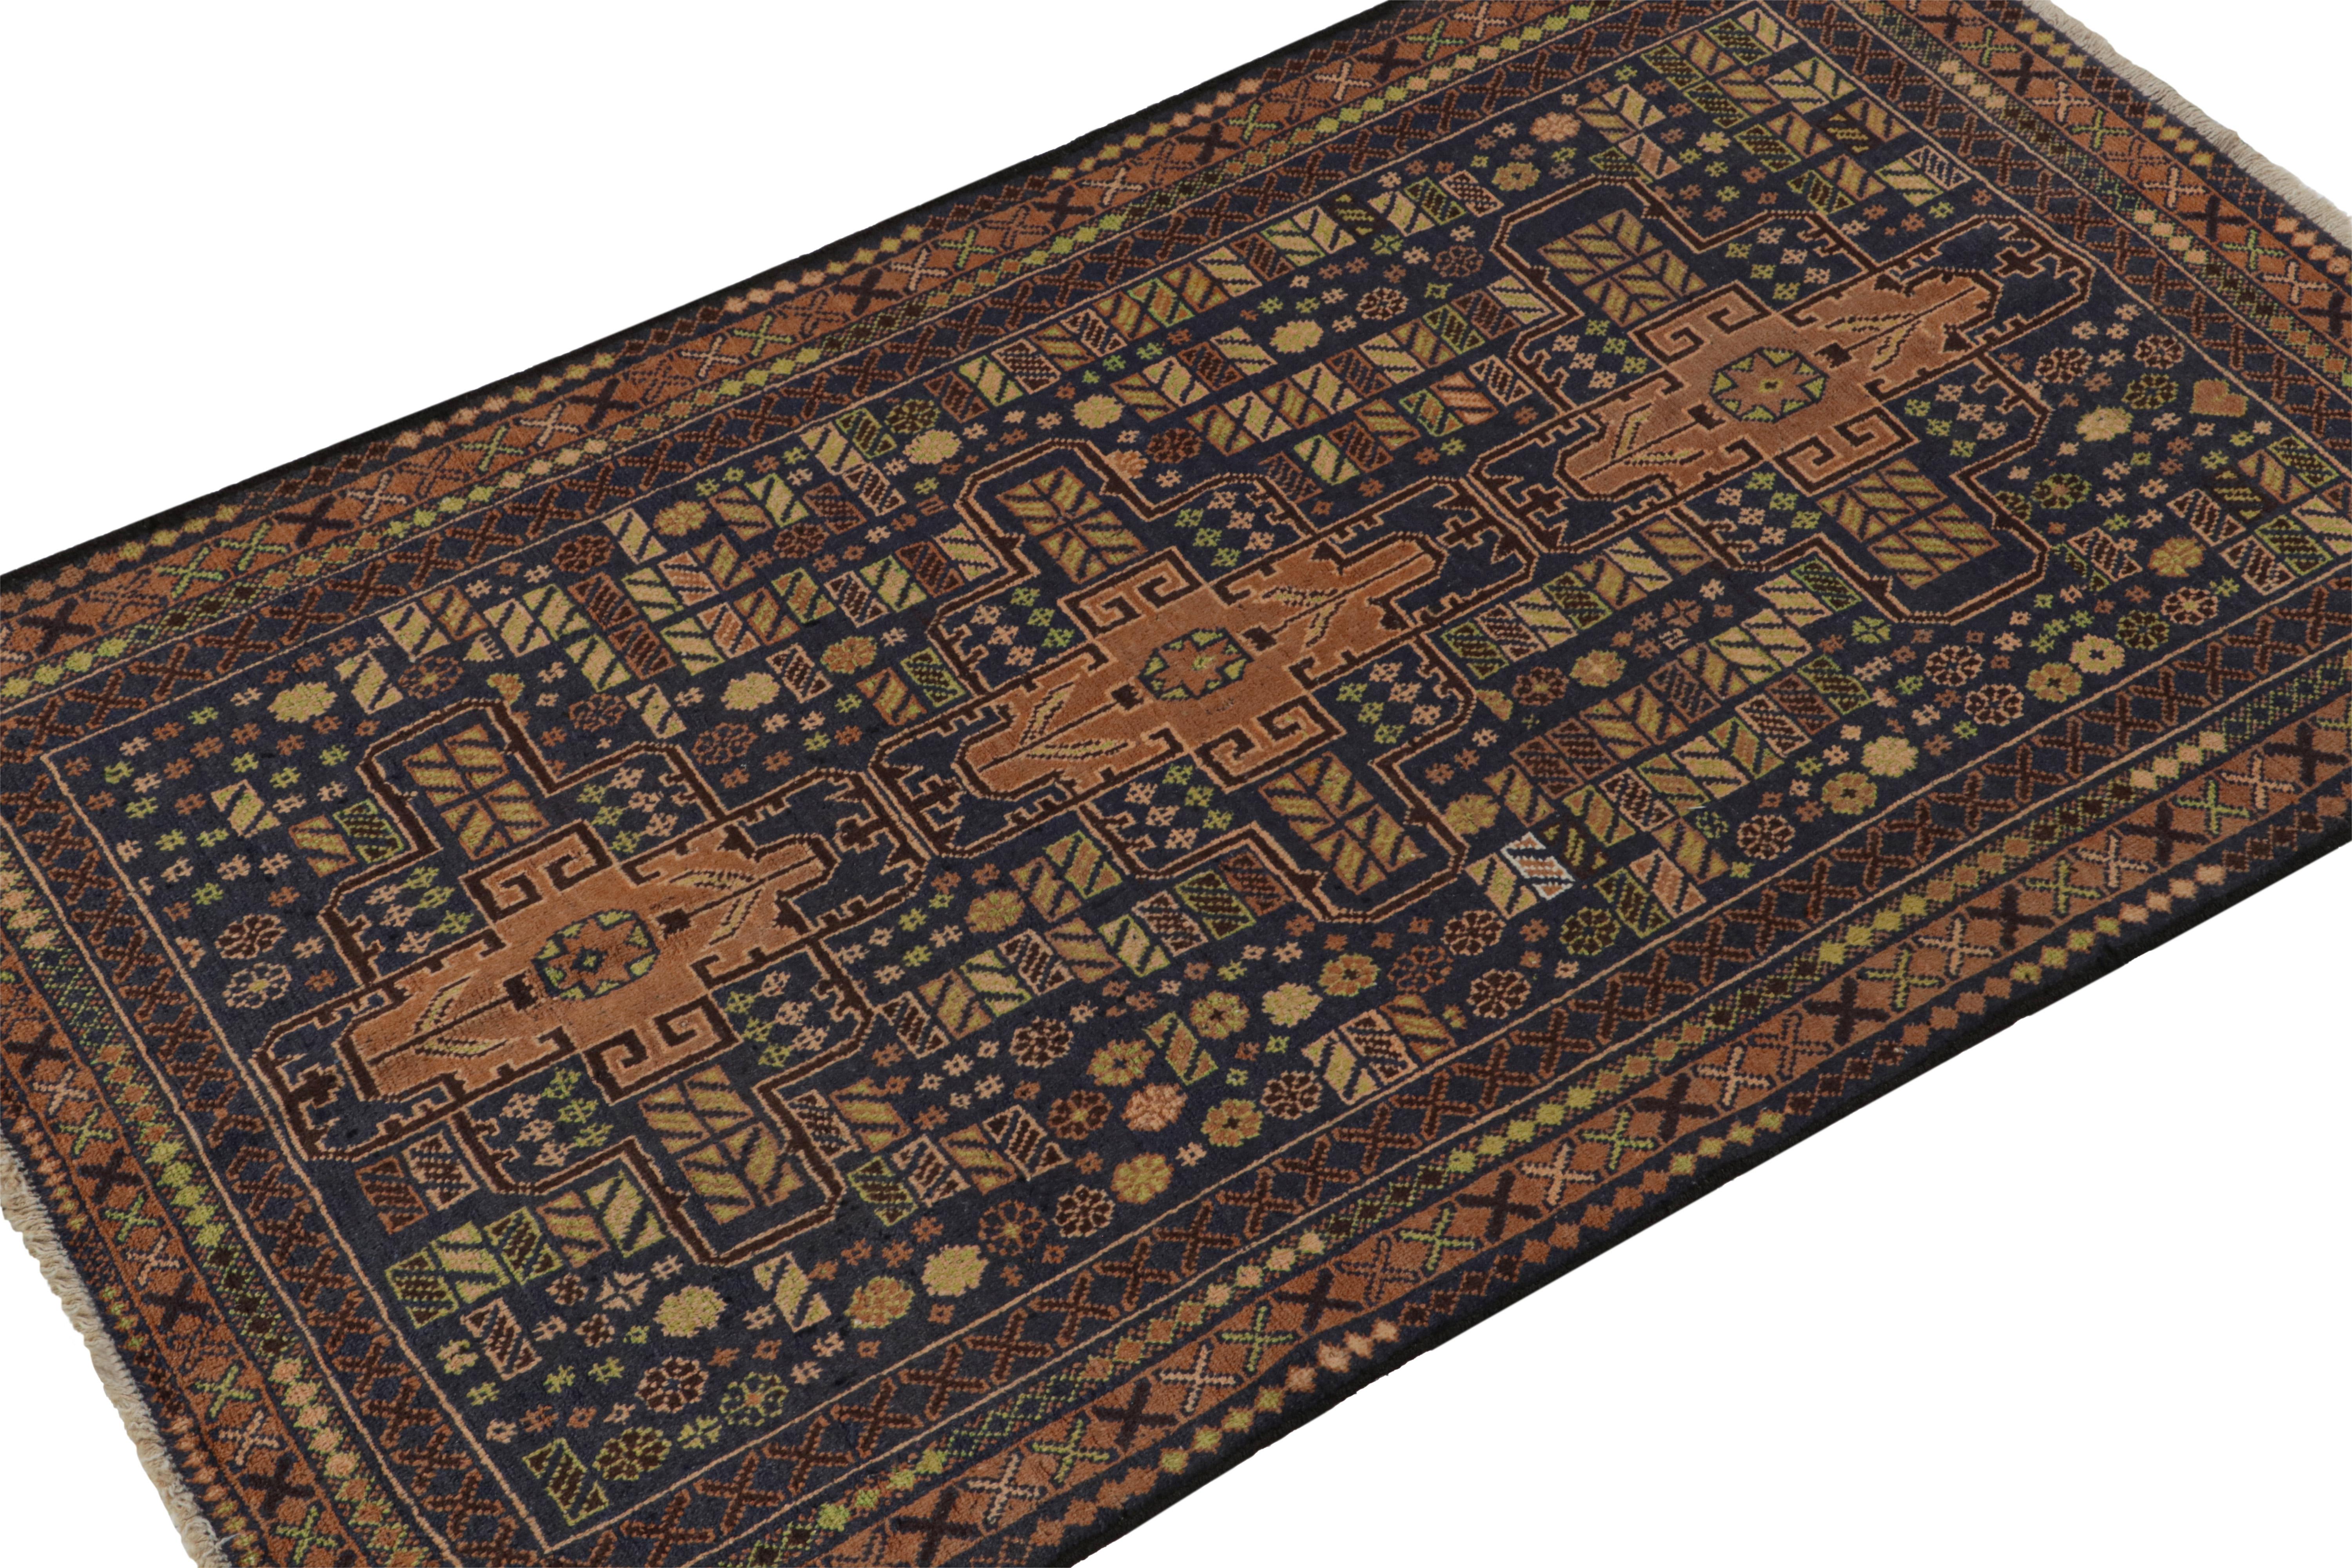 Hand-knotted in wool & goat hair, this vintage tribal rug of the 1950s is a coveted addition to Rug & Kilim’s Antique & Vintage collection. 

On the Design:

Coming from the Baluch tribe, this 4x6 rug boasts traditional patterns in tones of brown &